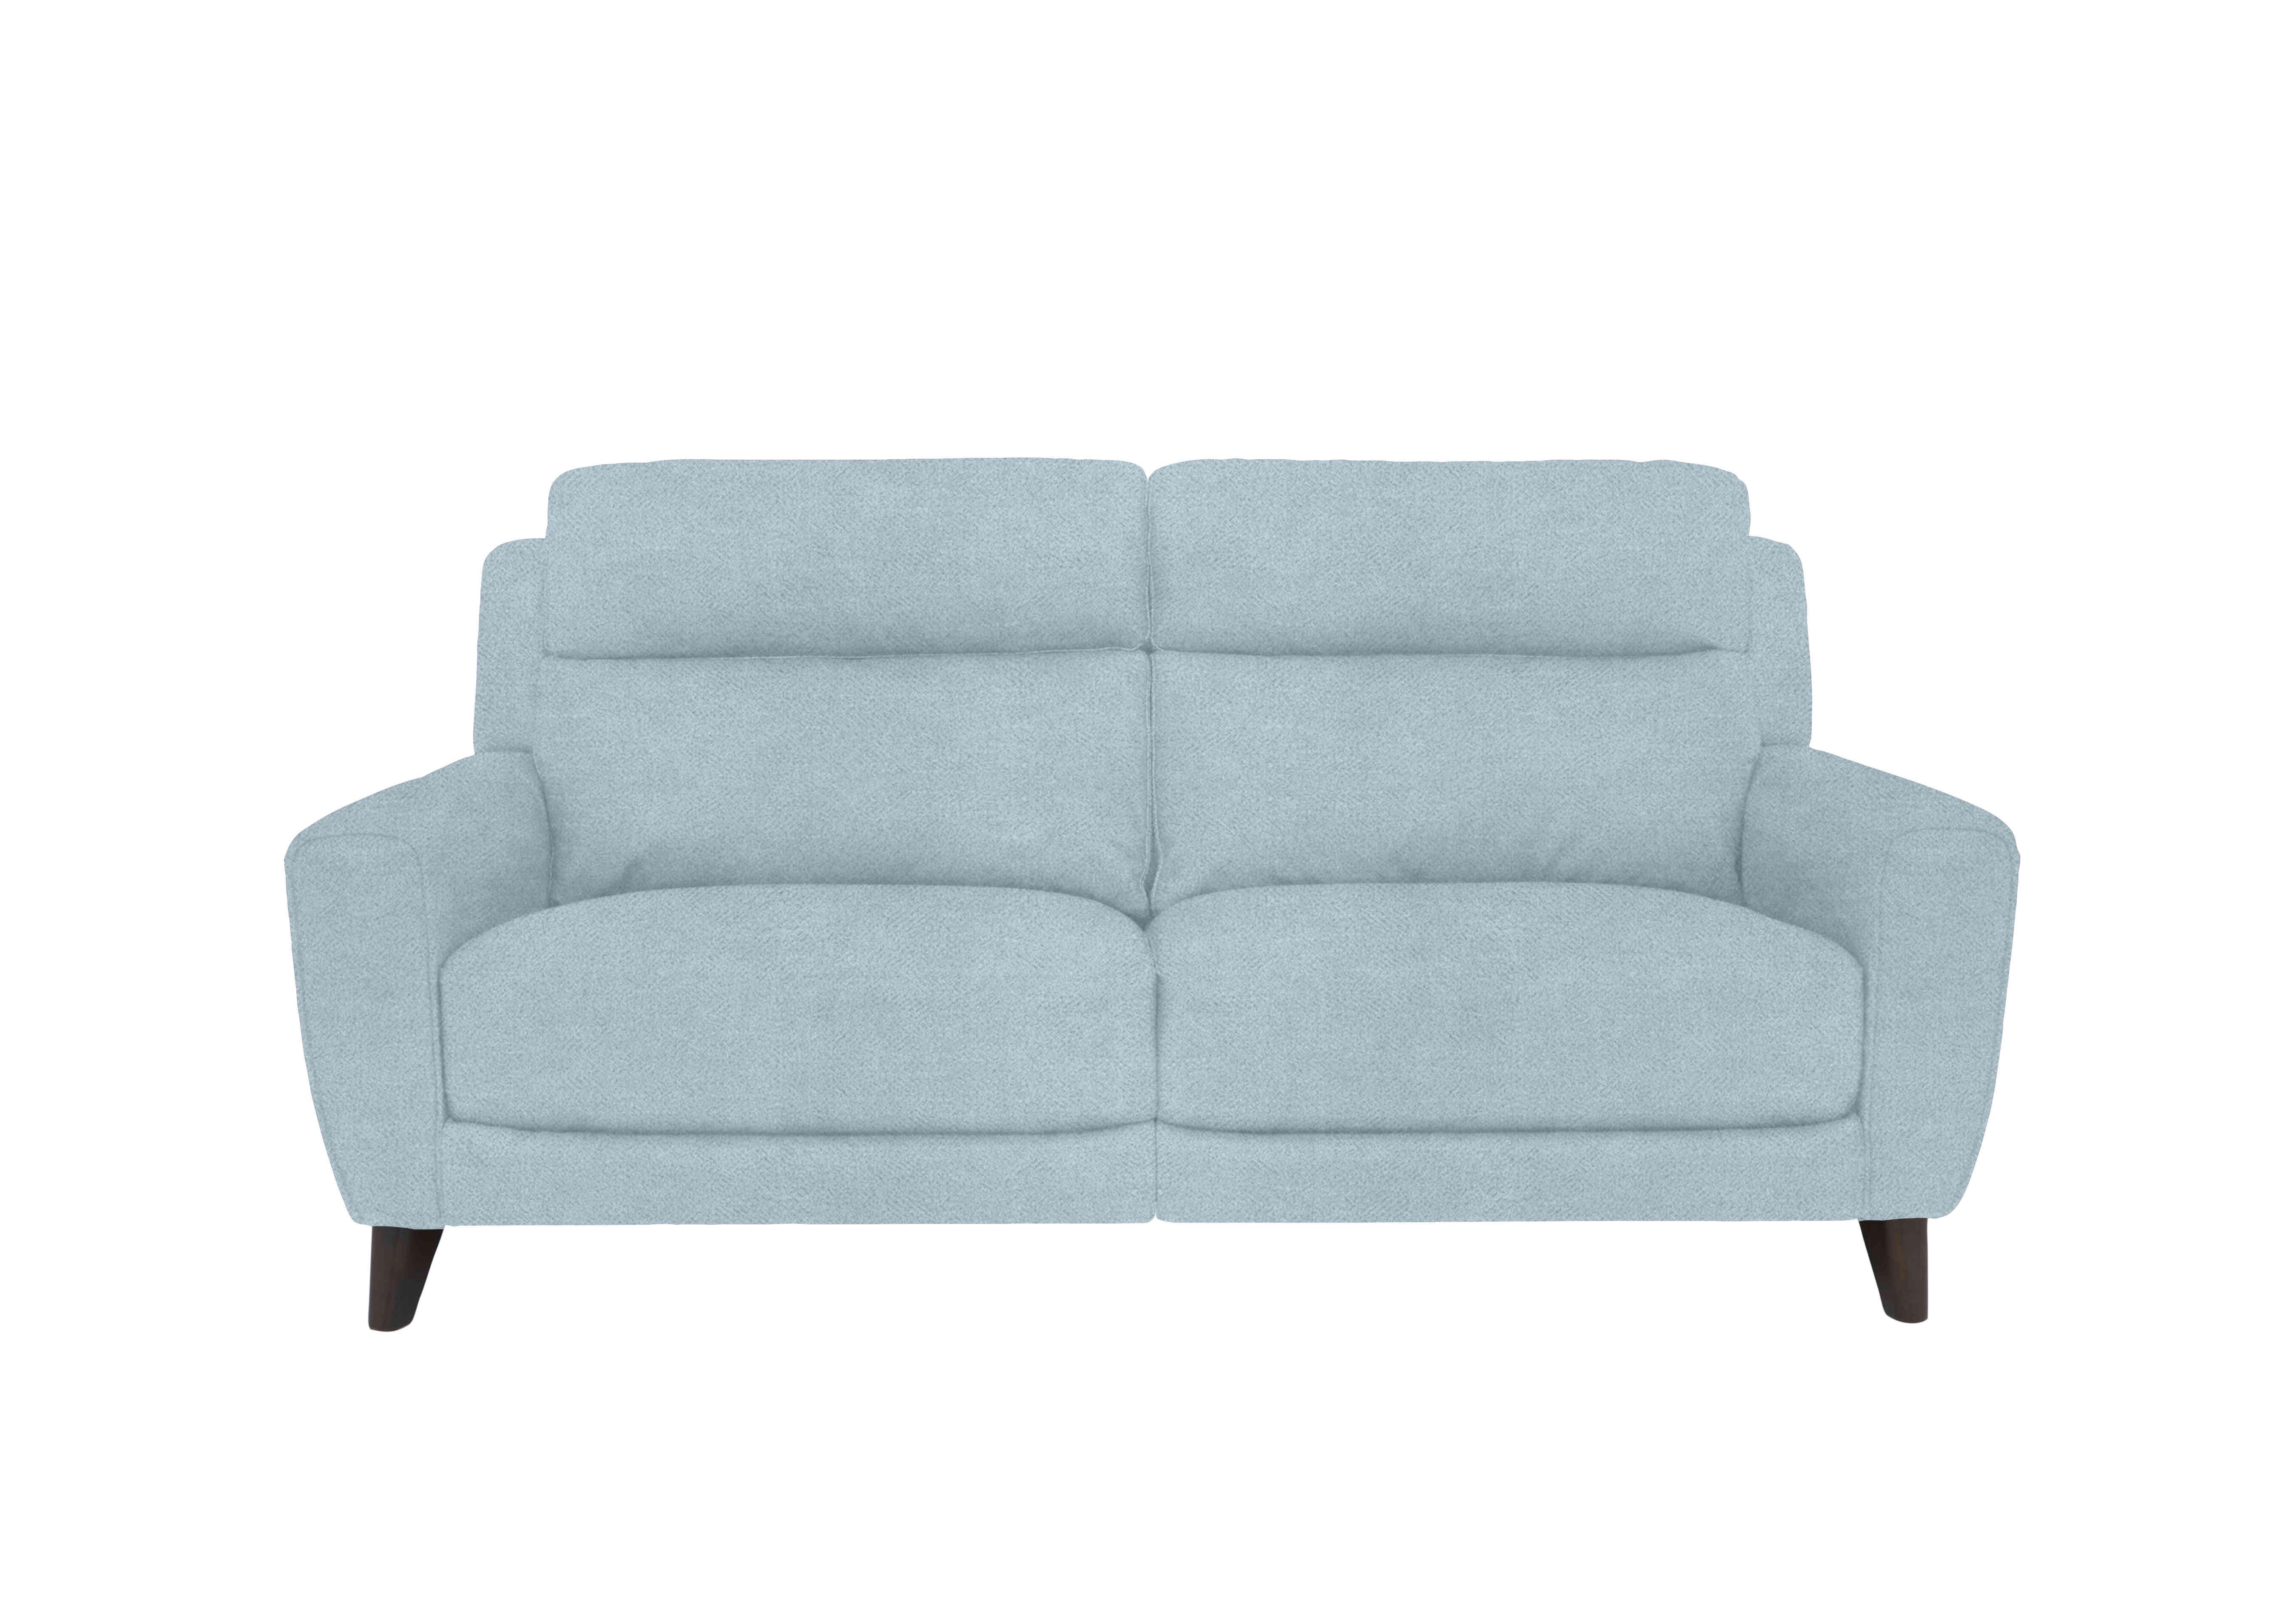 Zen 3 Seater Fabric Power Recliner Sofa with Power Headrests in Fab-Meo-R17 Baby Blue on Furniture Village